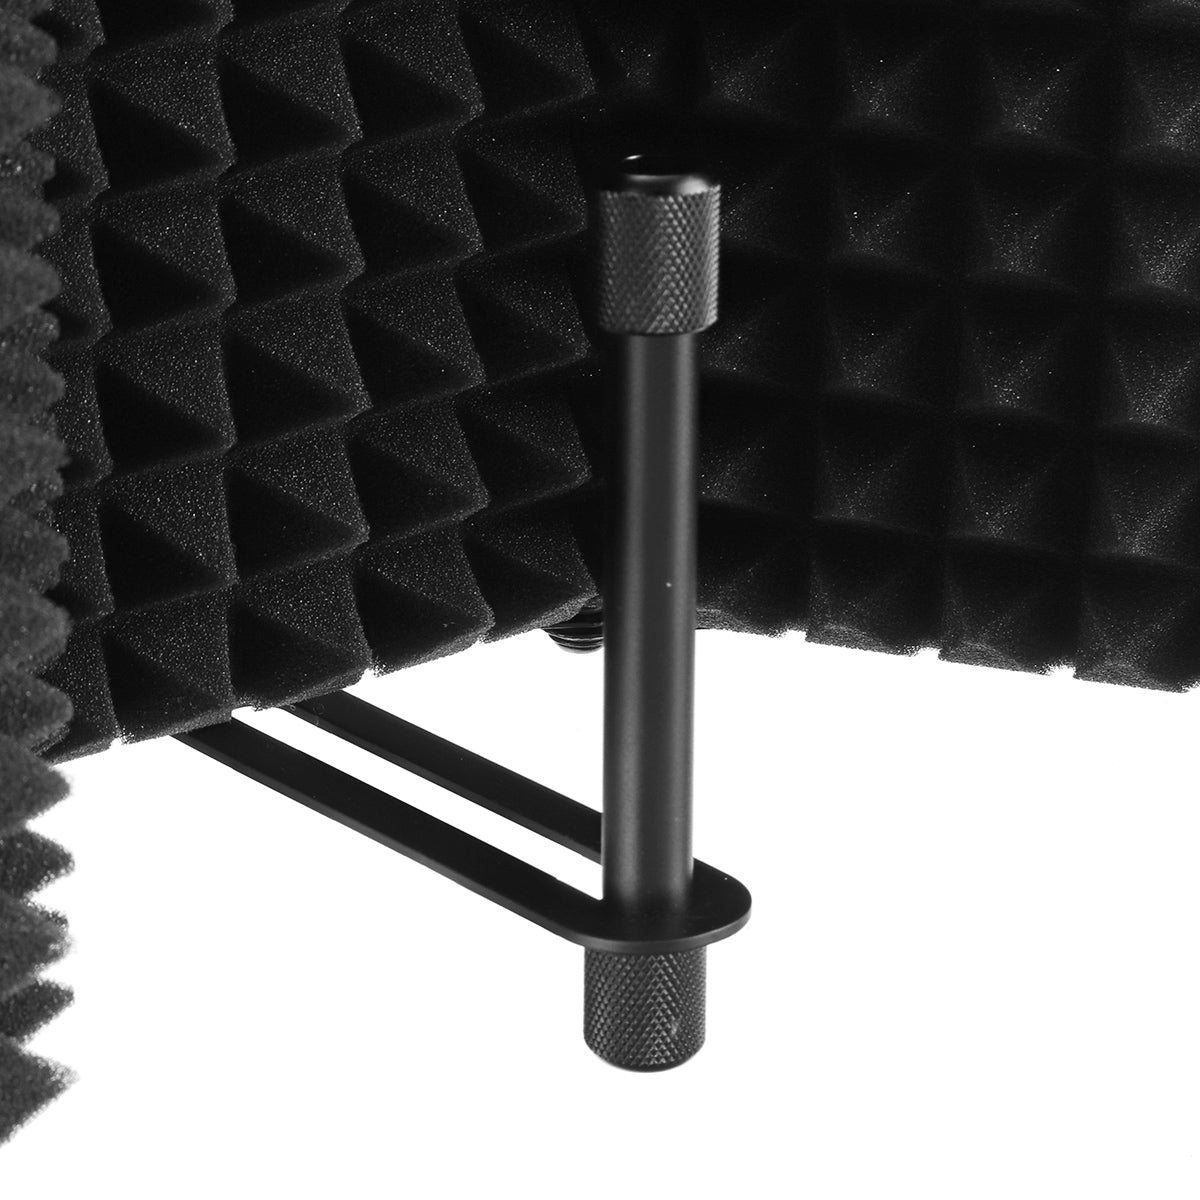 Foldable Microphone Acoustic Isolation Shield Acoustic Foams Studio Three-door Noise Enclosure Panel Filter